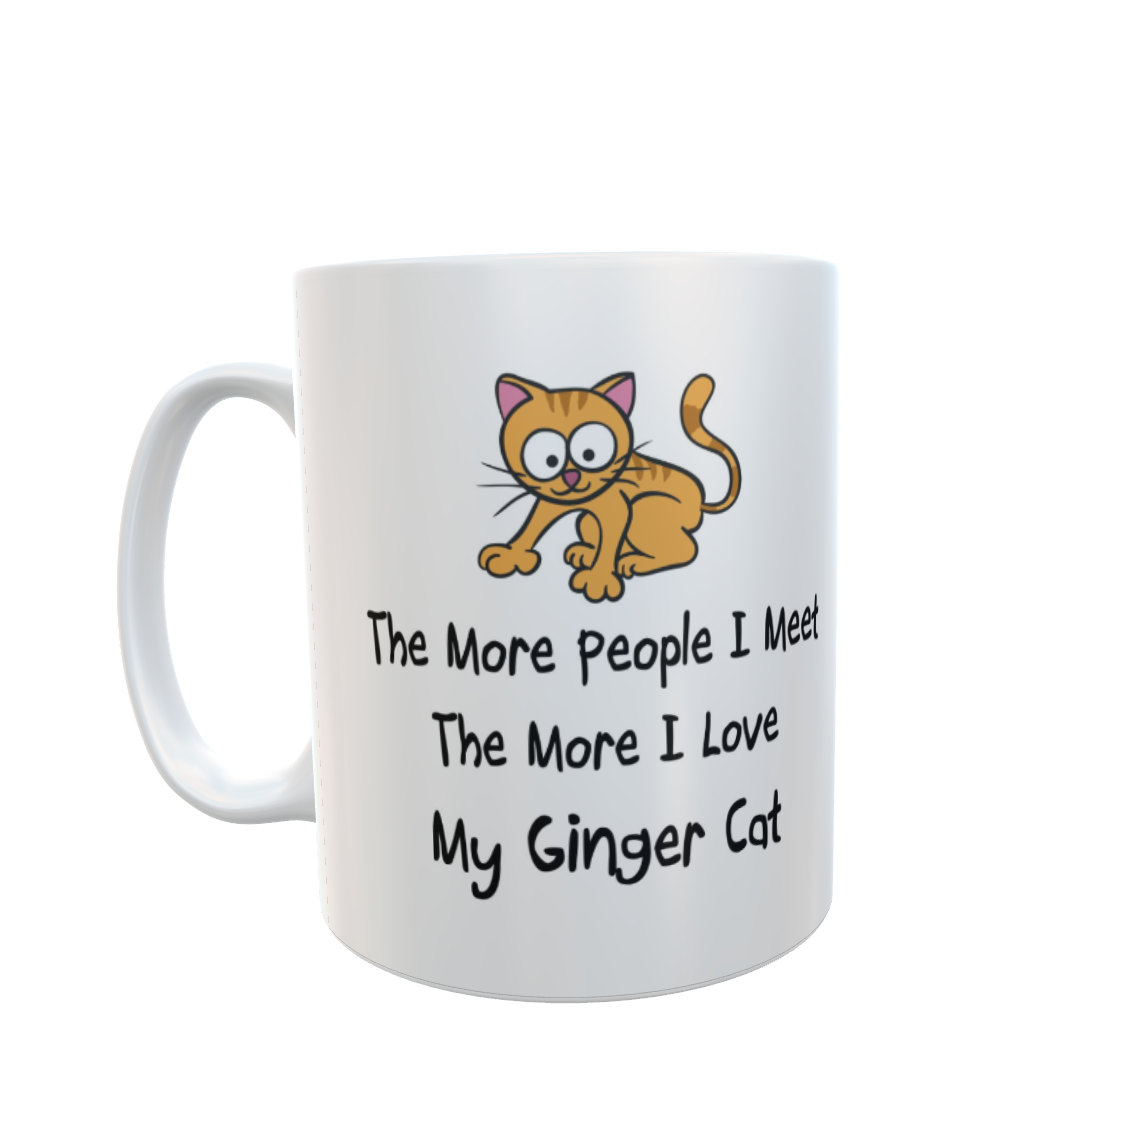 Ginger Cat Mug Gift - The More People I Meet The More I Love My - Cute Novelty Pet Owner Lover Cup Present